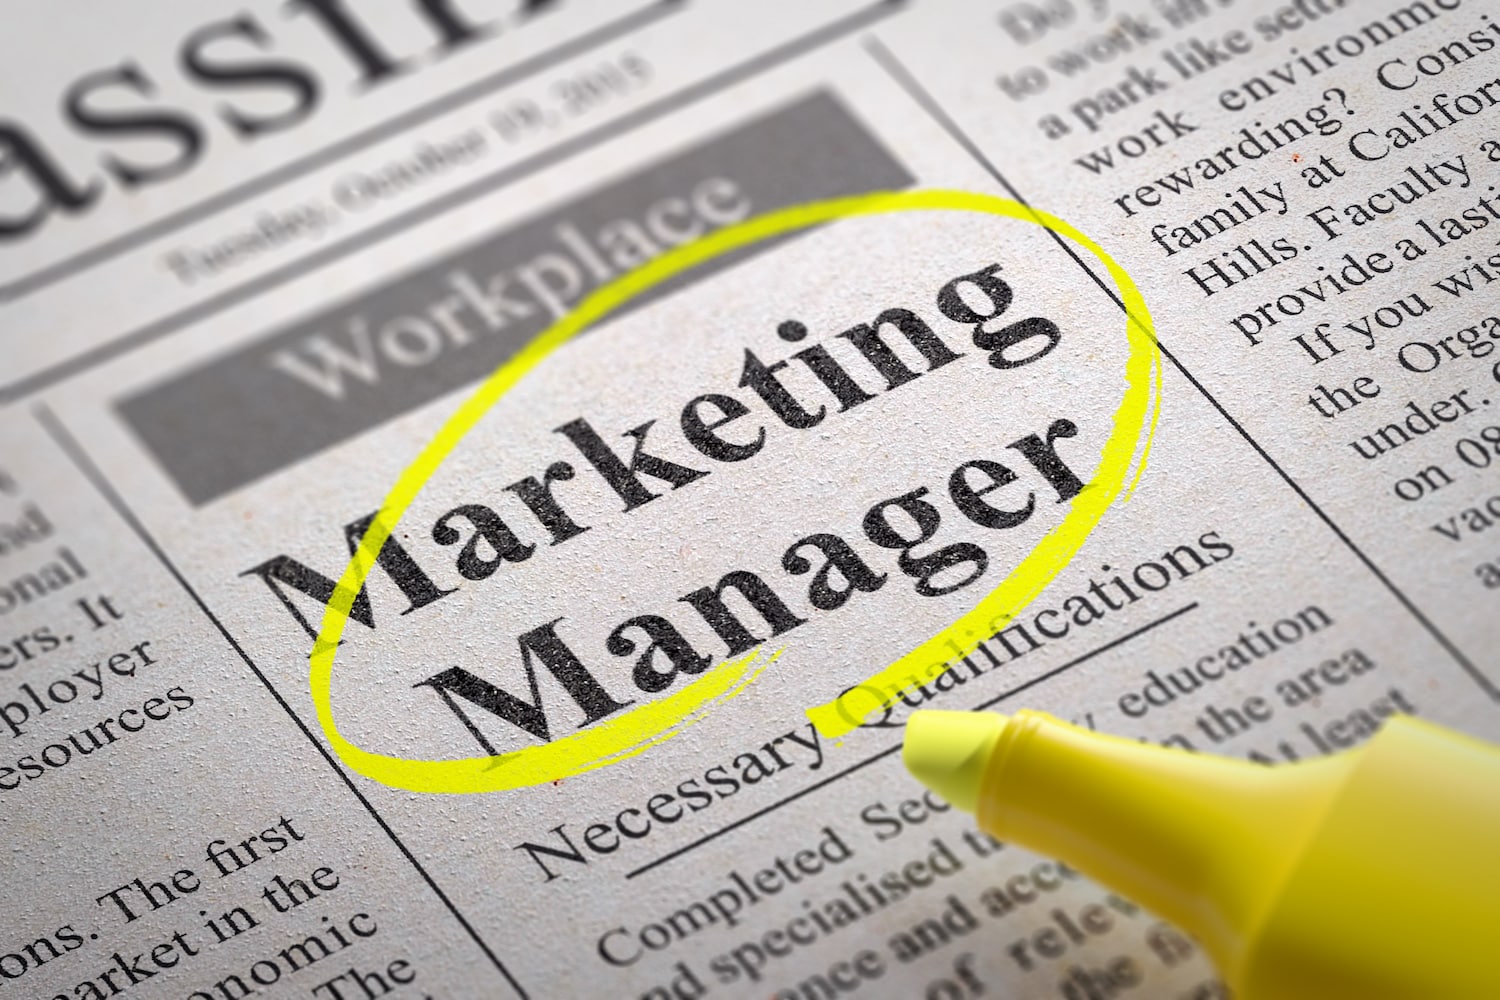 Marketing Manager Jobs in Newspaper.